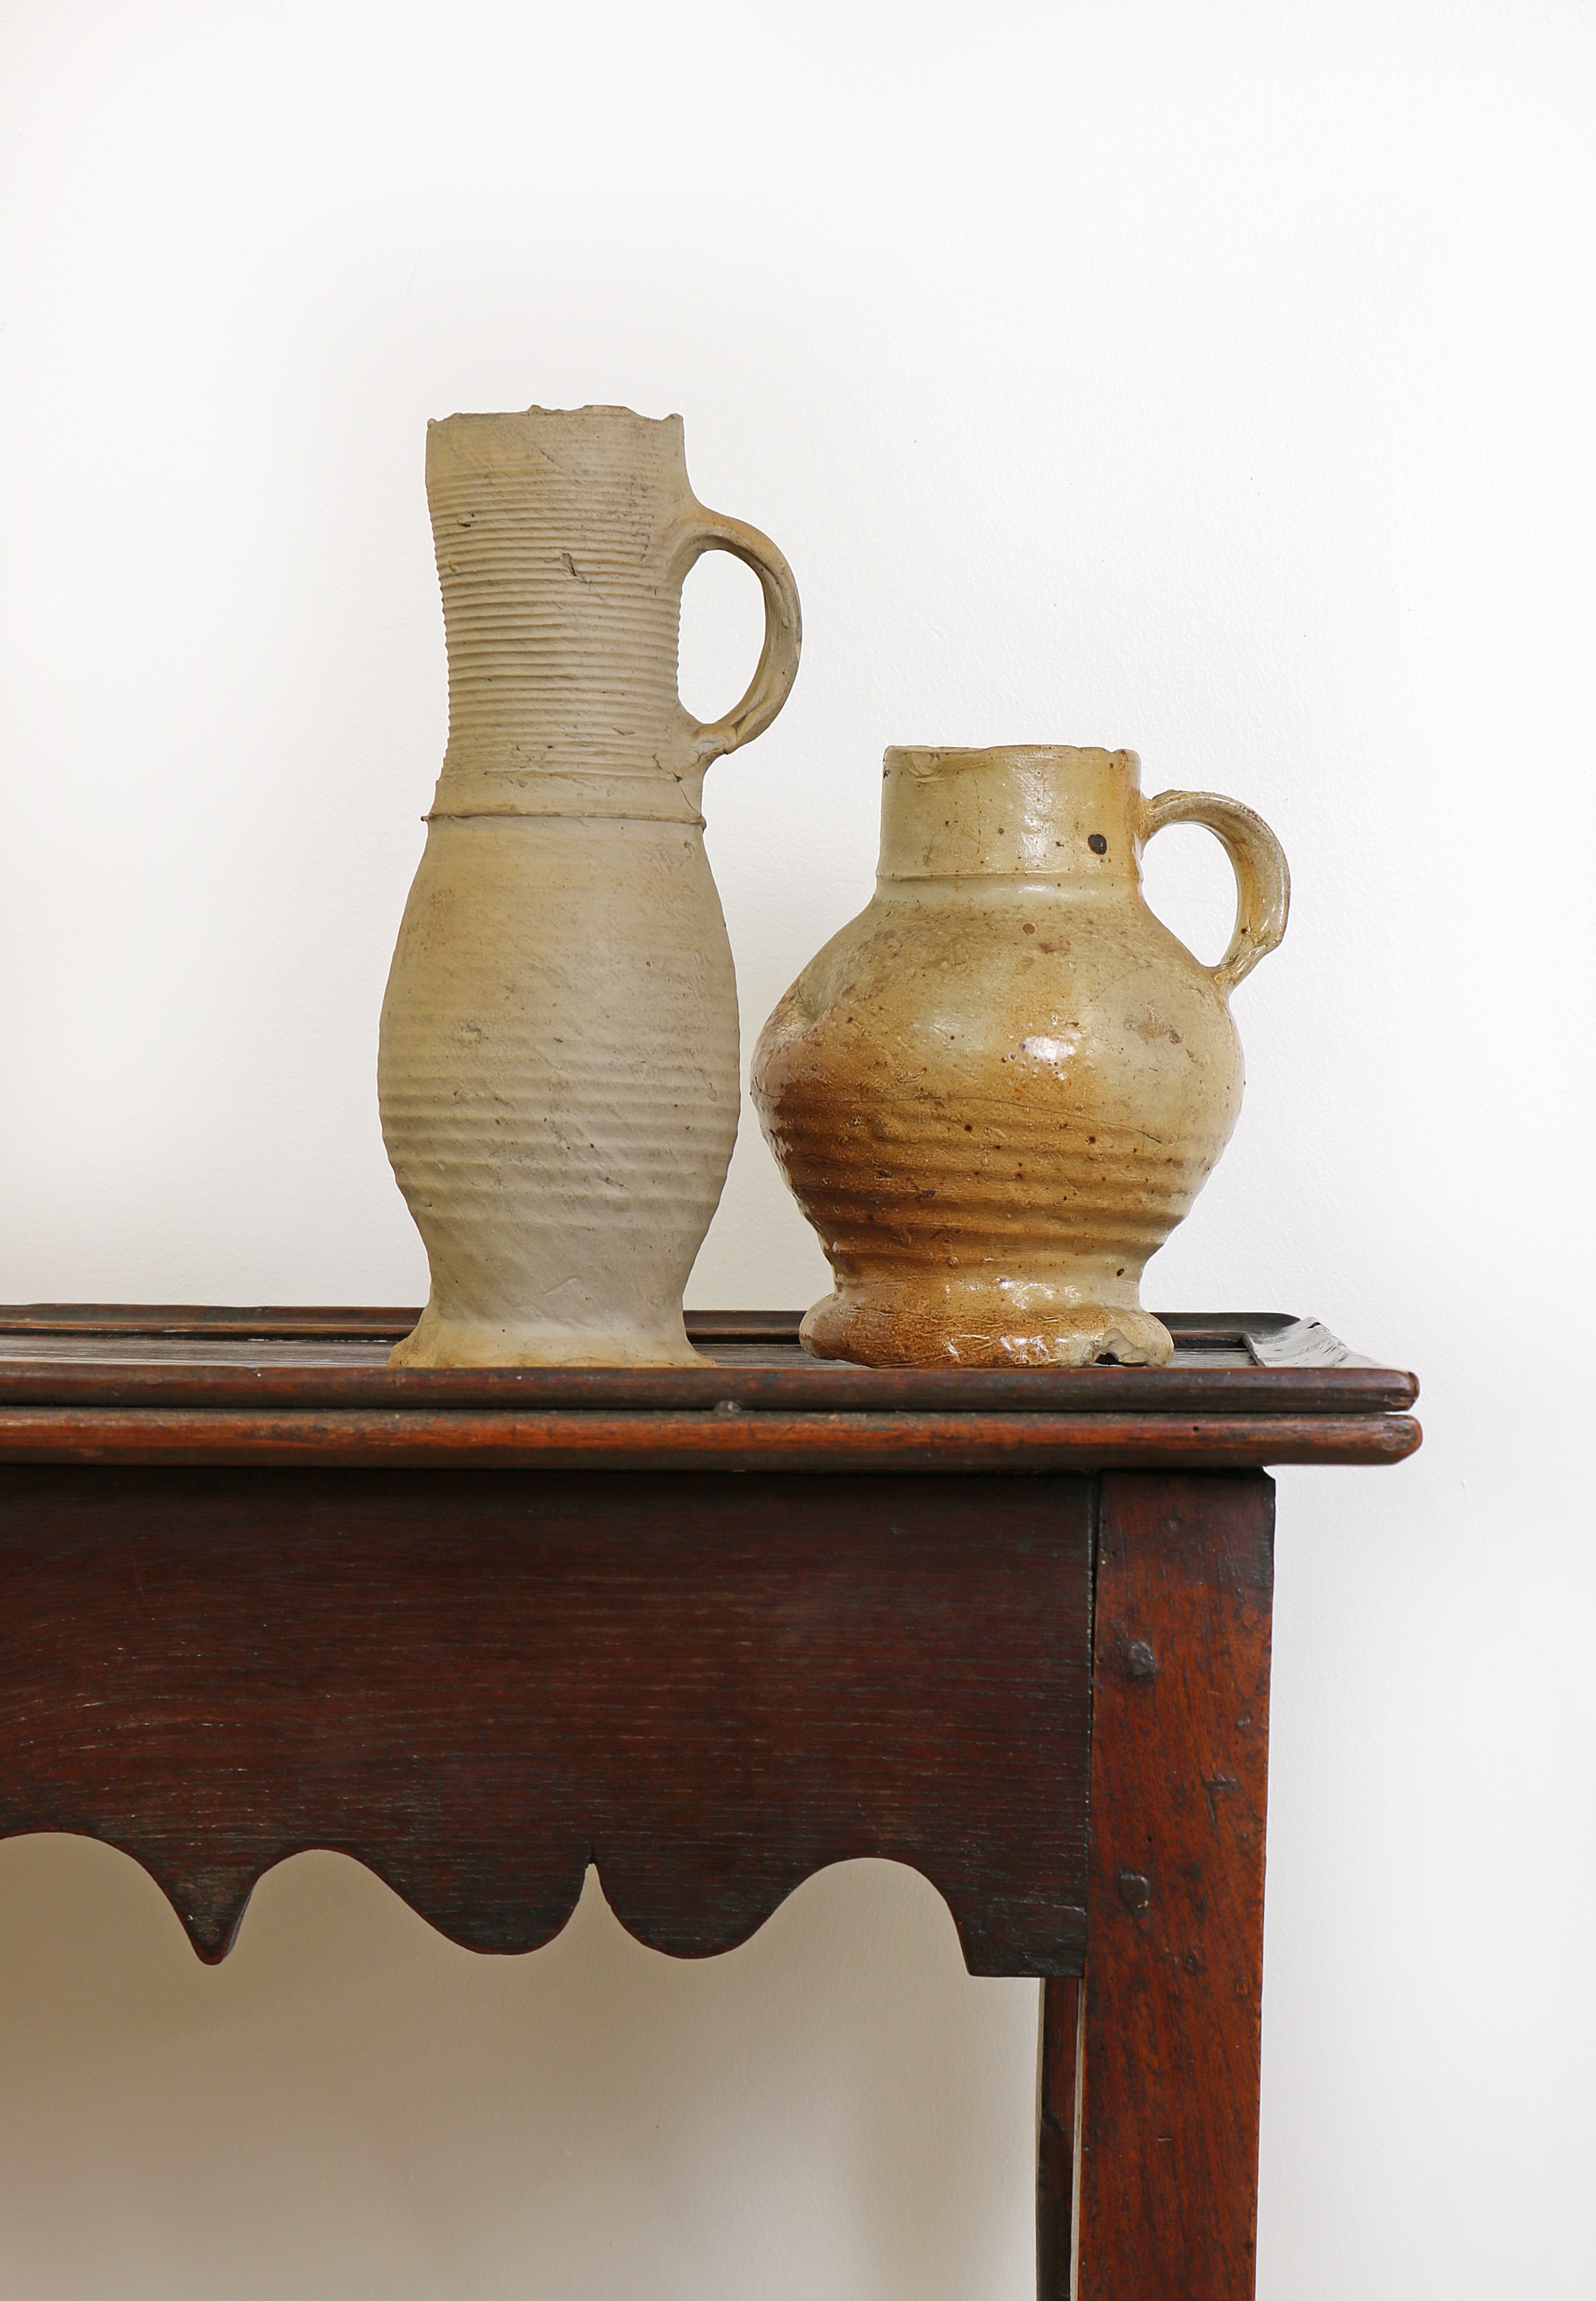 Pots from Anthony Thwaite's collection